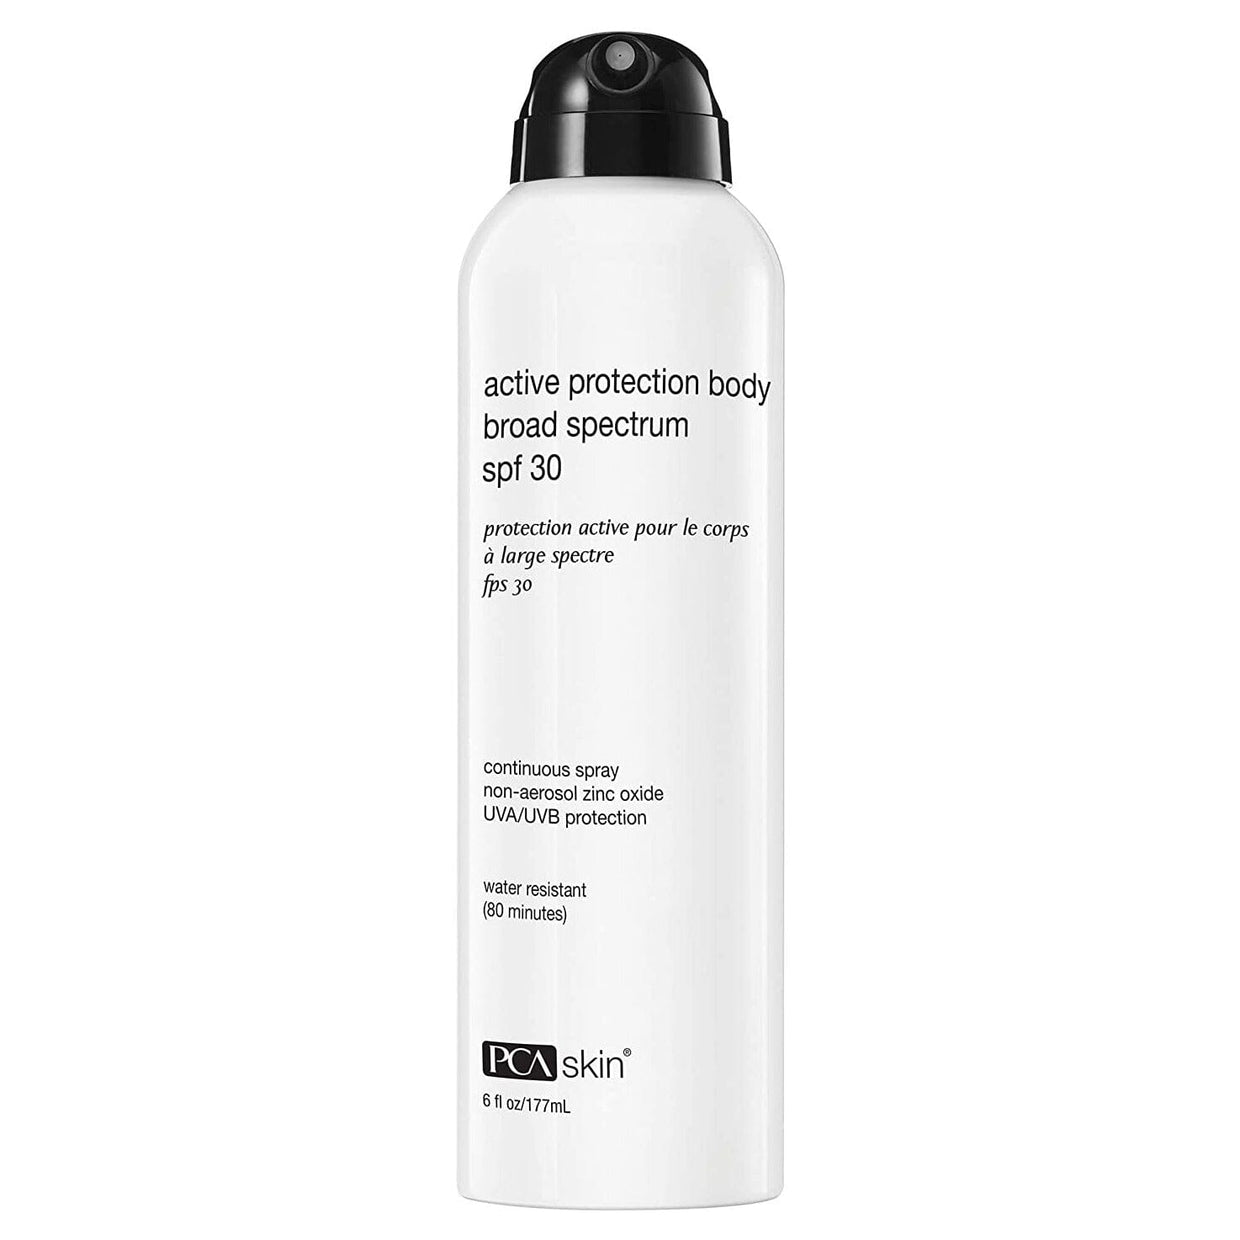 PCA Skin Active Body Protection Broad Spectrum SPF 30 PCA Skin 6 oz. Shop at Exclusive Beauty Club